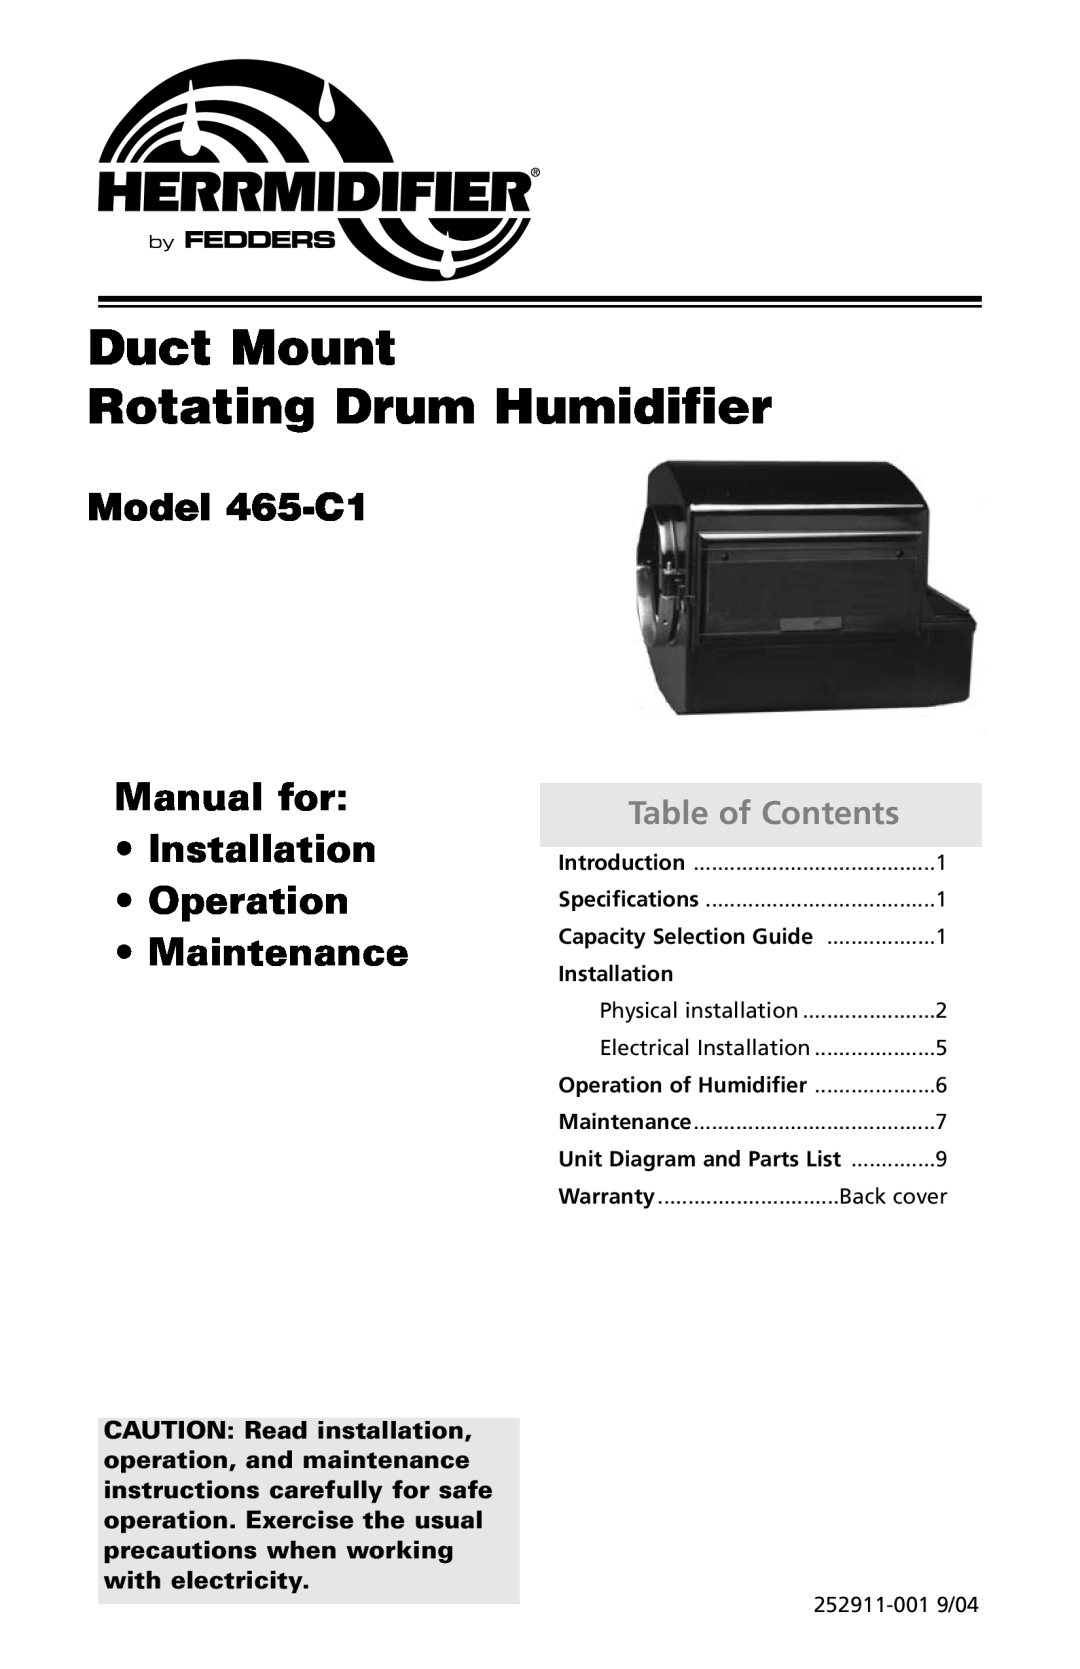 Herrmidifier Co specifications Duct Mount Rotating Drum Humidifier, Model 465-C1, Table of Contents, Installation 